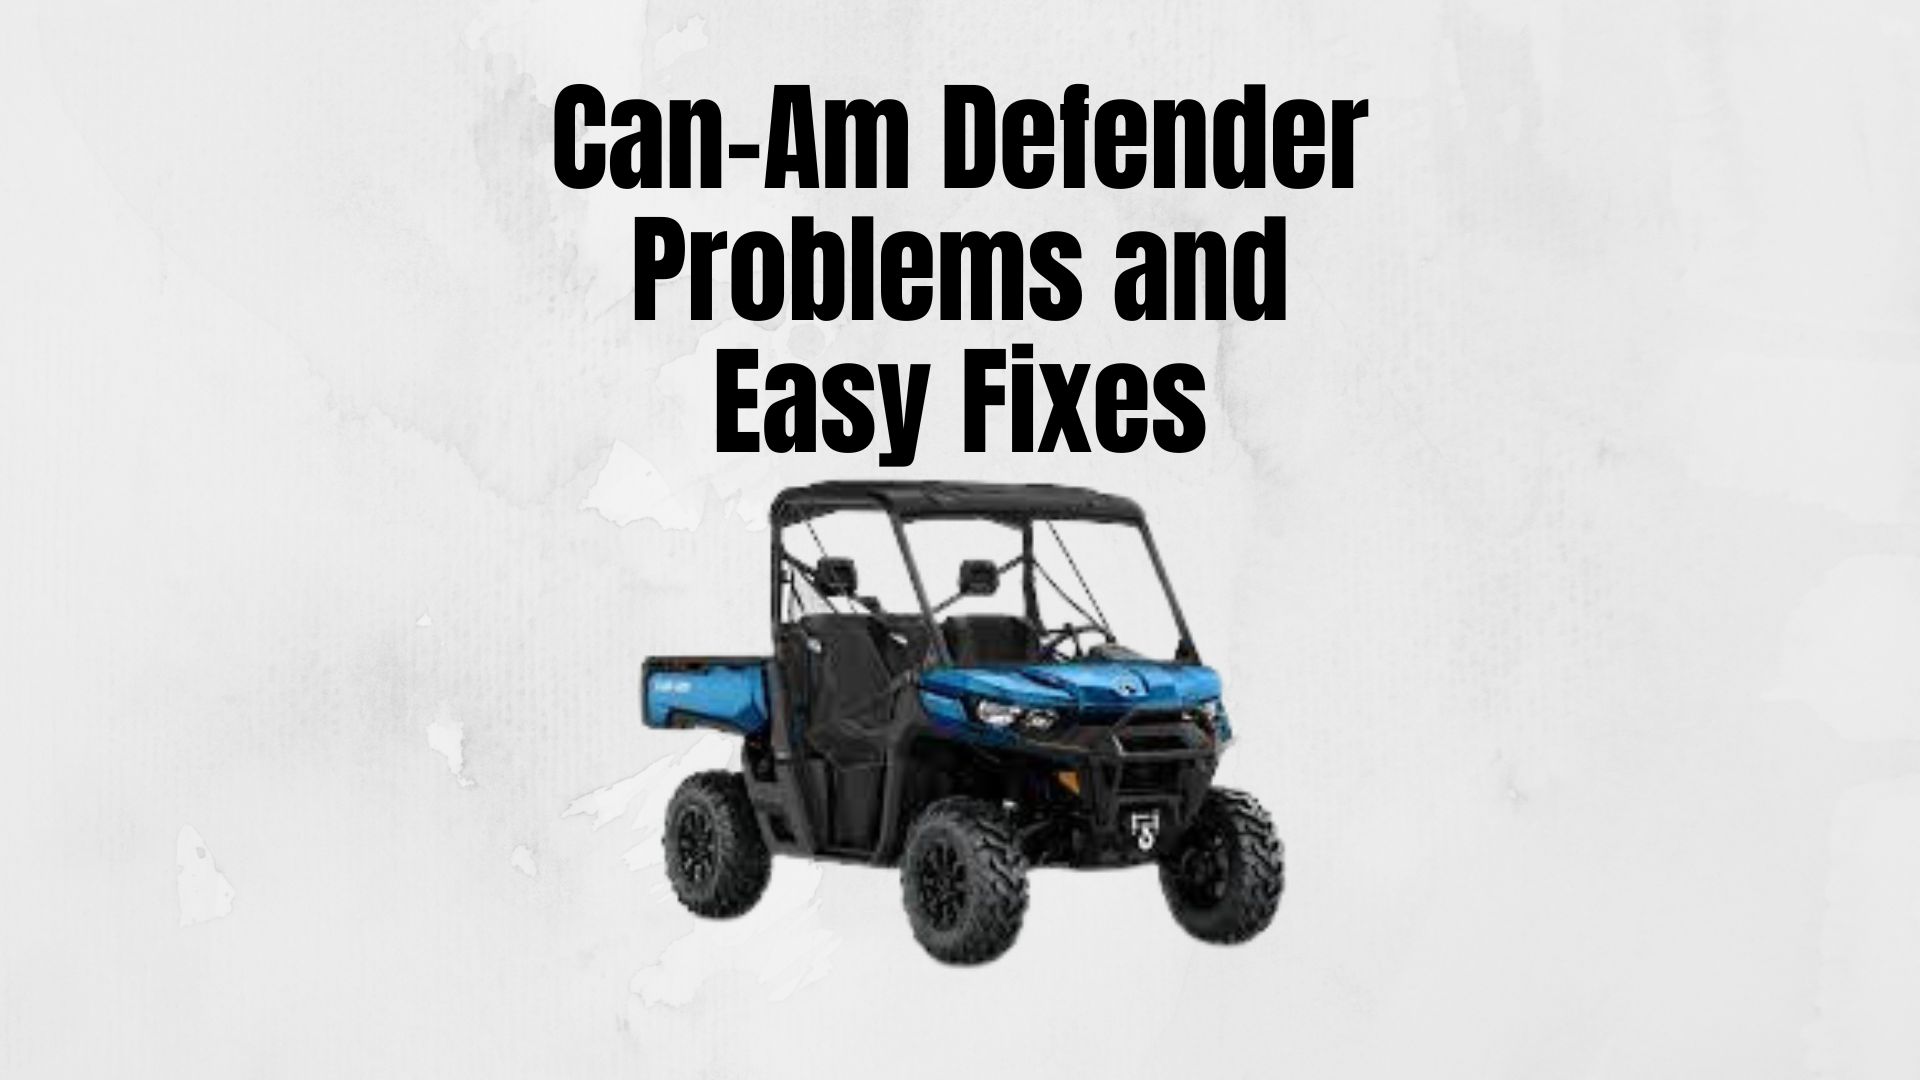 Can-Am Defender Problems and Easy Fixes